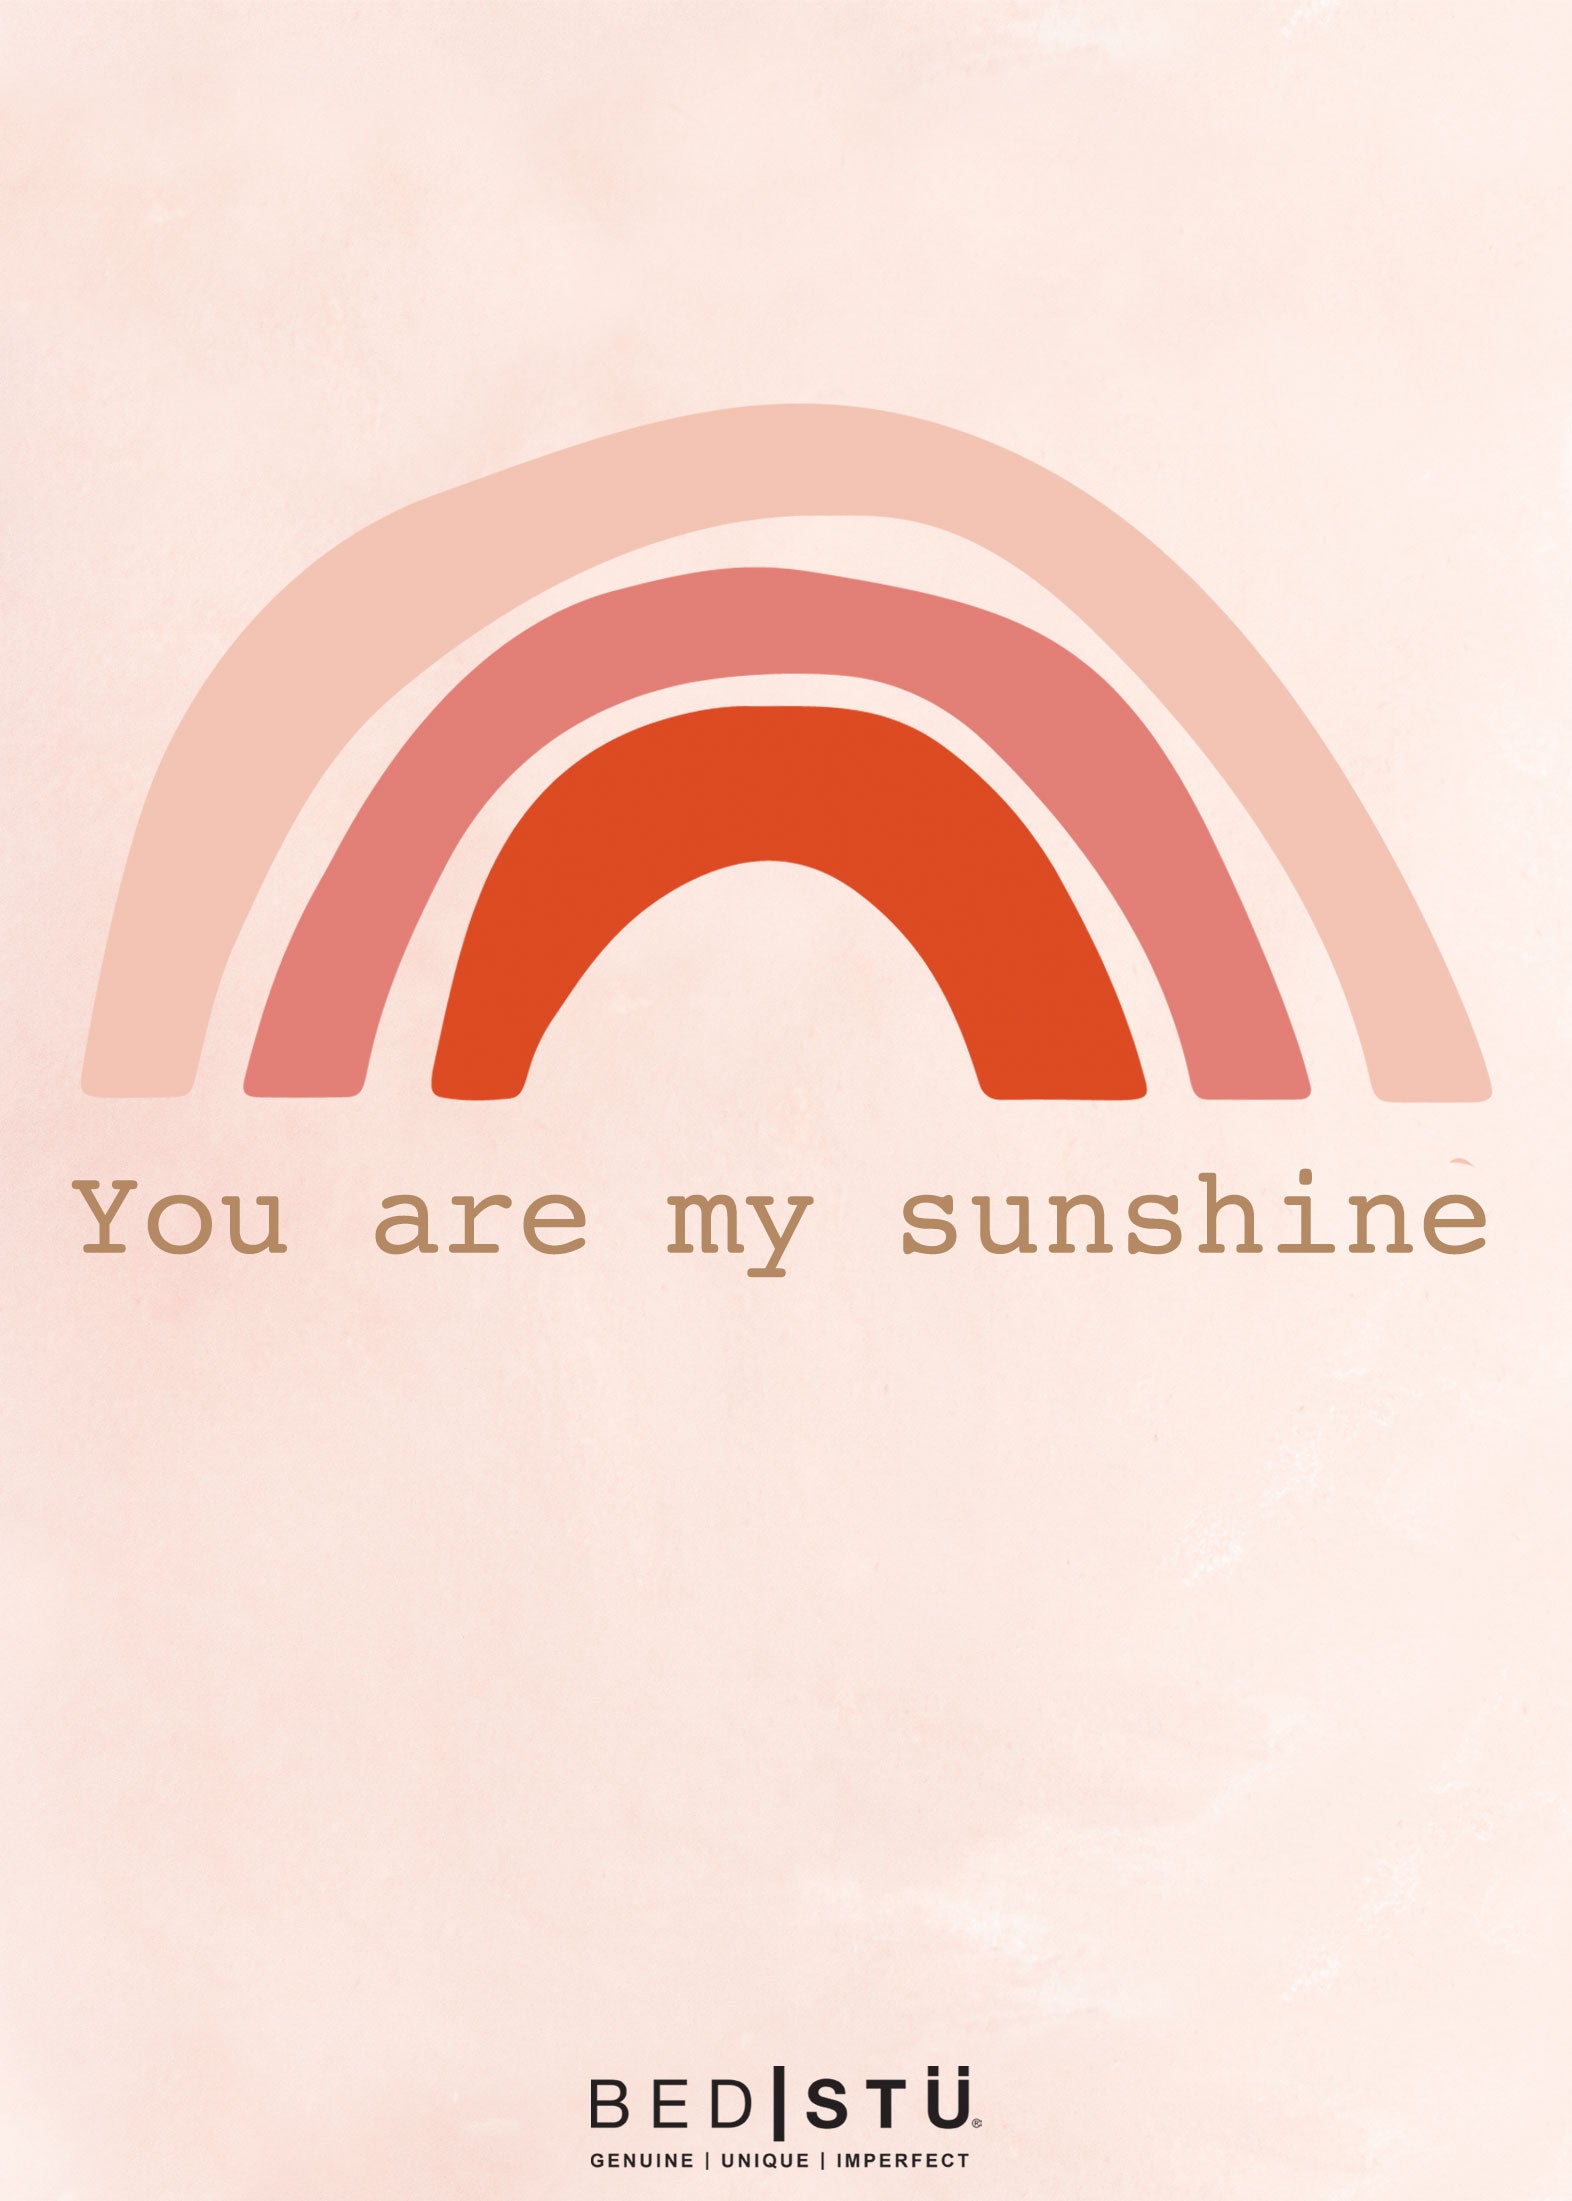 Get an eGift card for Bed|Stü and give the perfect gift to someone who brightens up your day like My Sunshine.